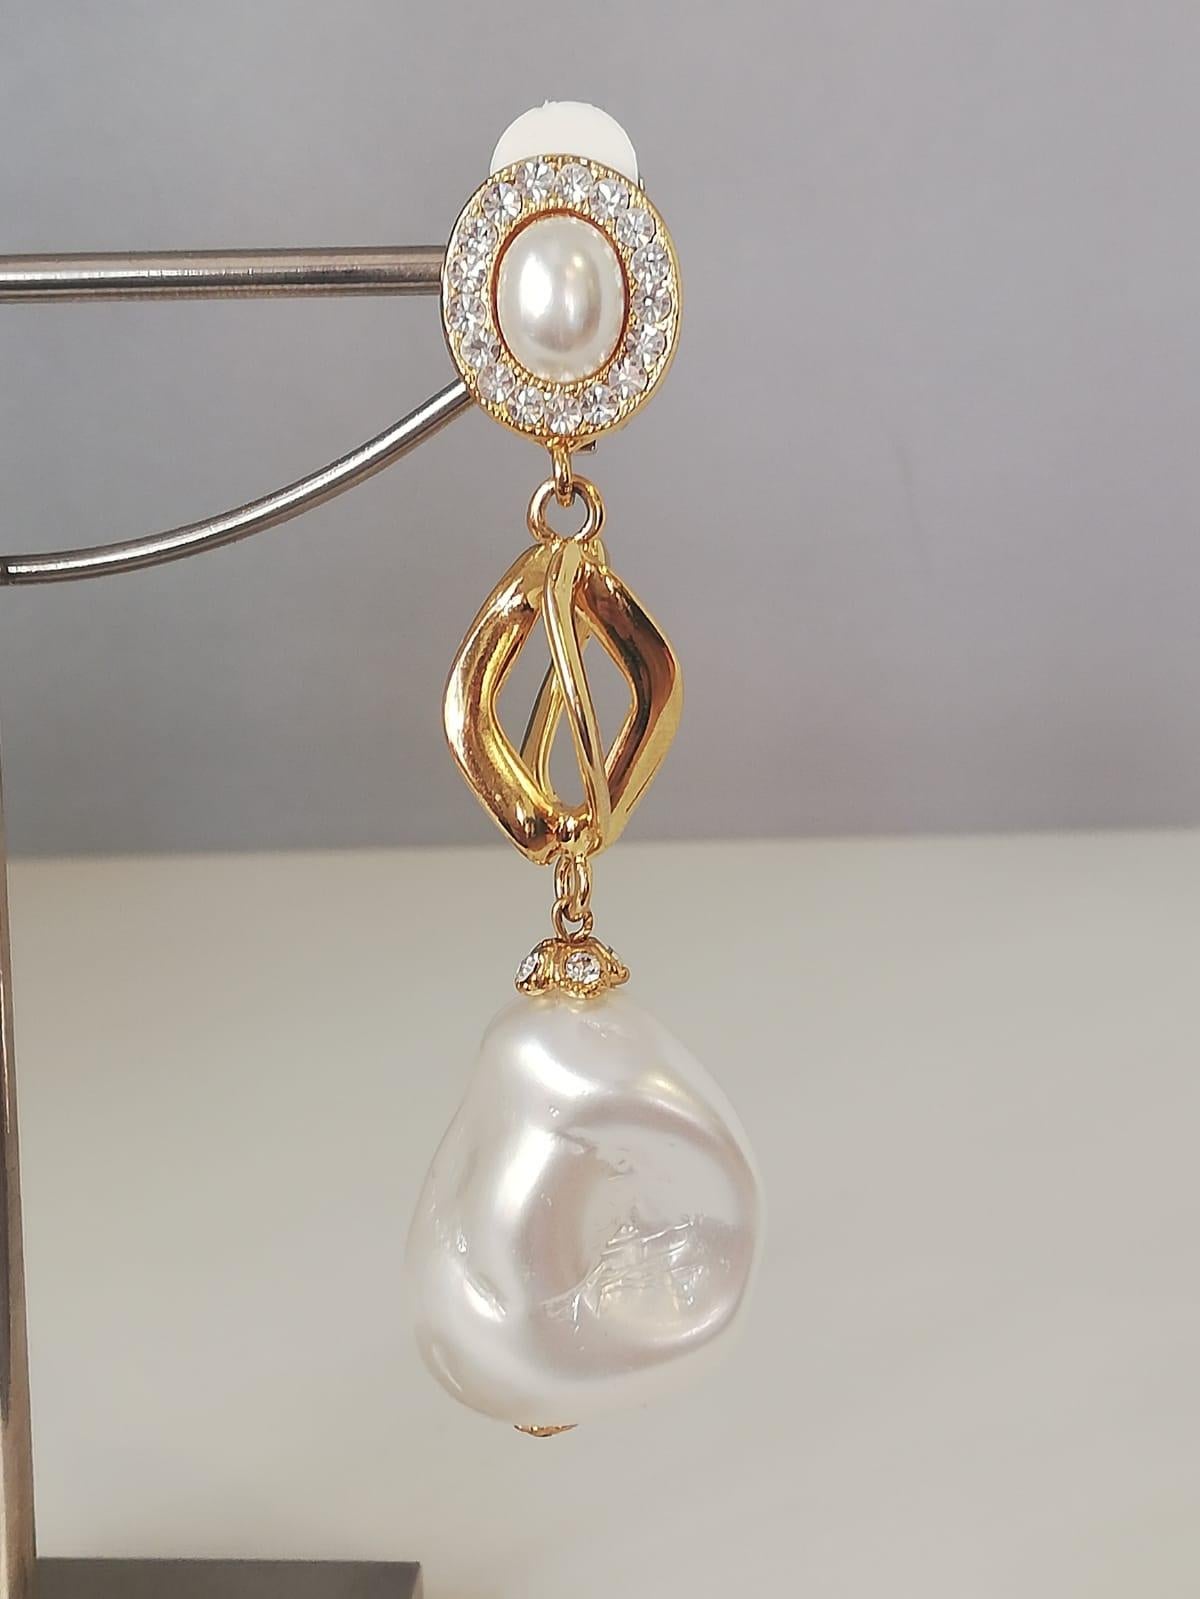 Beautiful and chic earrings by Carlo Zini
Non allergenic brass
18 KT Gold dipped
Amazing combinations of baroque pearls and swarovski crystals 
Clip on closure, pierced on request
Length cm 8 (3.14 inches)
100% Artisanal work, made in